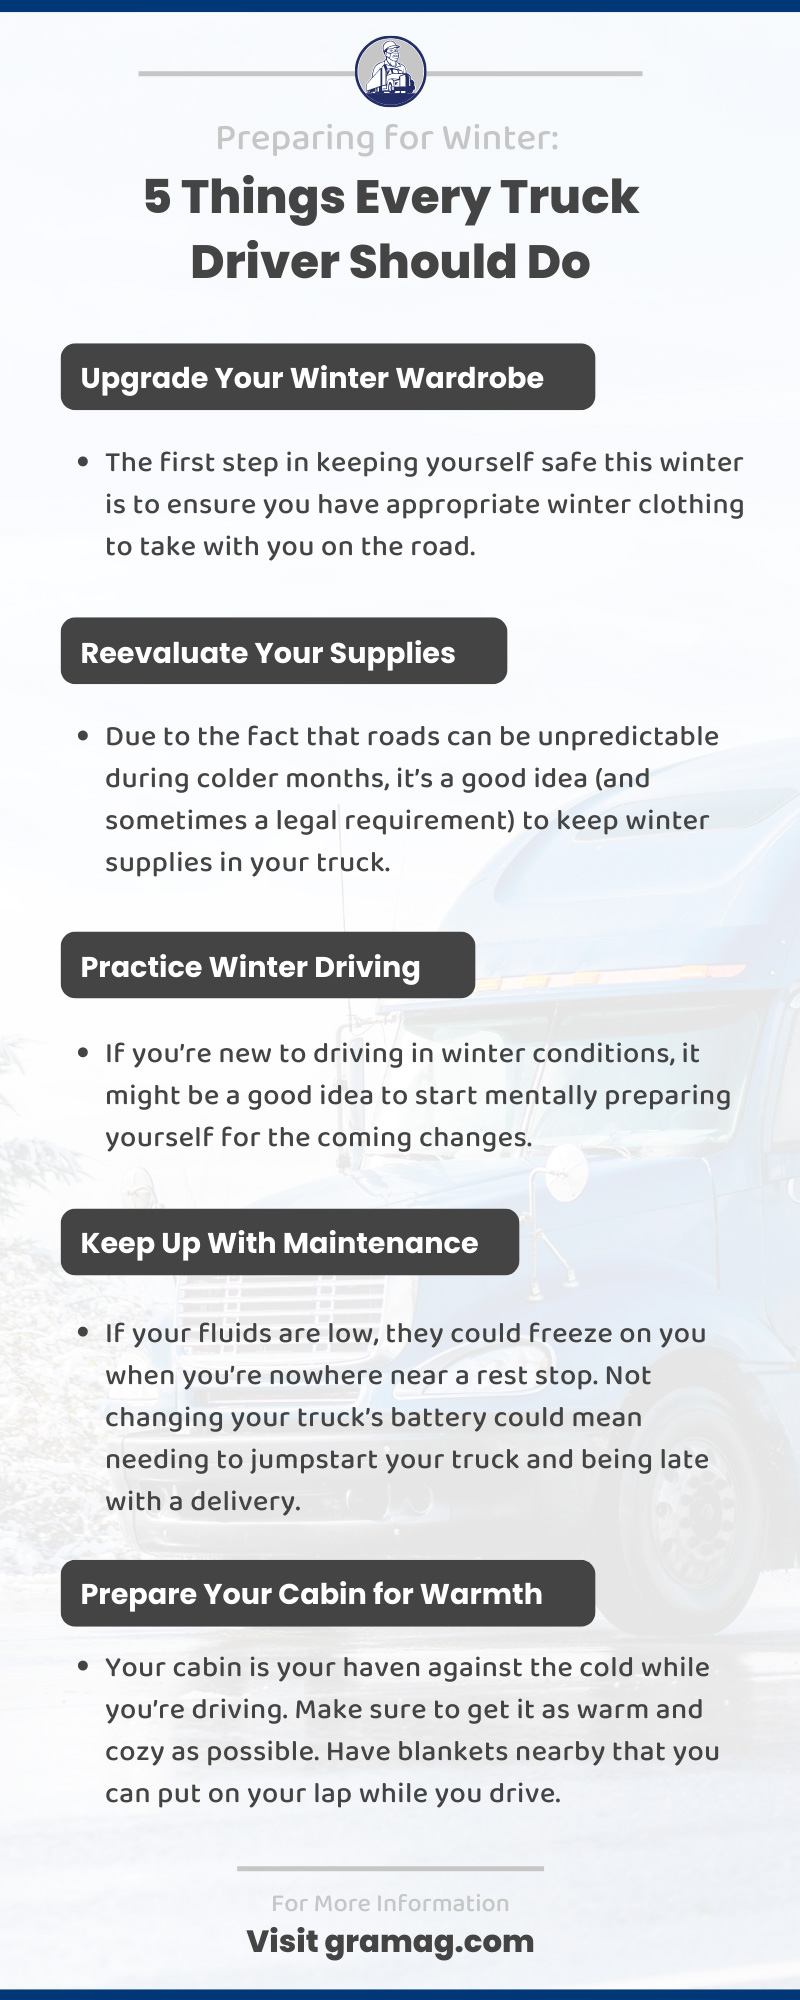 Preparing for Winter: 5 Things Every Truck Driver Should Do